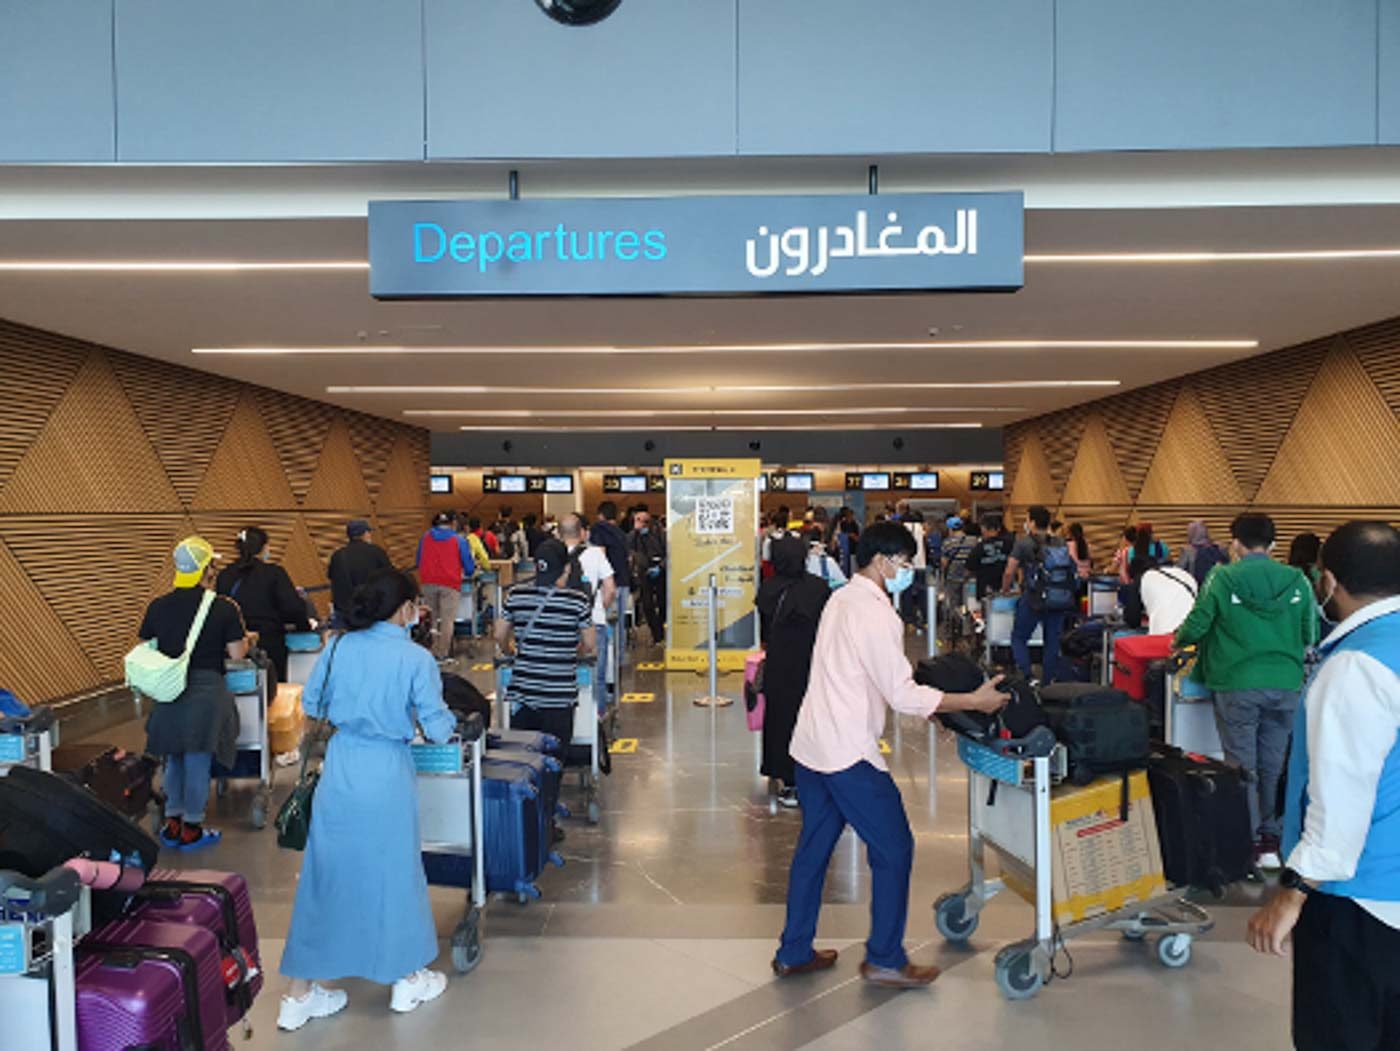 HOMEBOUND. Some 300 overseas Filipinos prepare to check in at Kuwait International Airport, before taking their chartered Kuwait Airways flight to Manila on July 1, 2020. Photo from Philippine embassy in Kuwait 